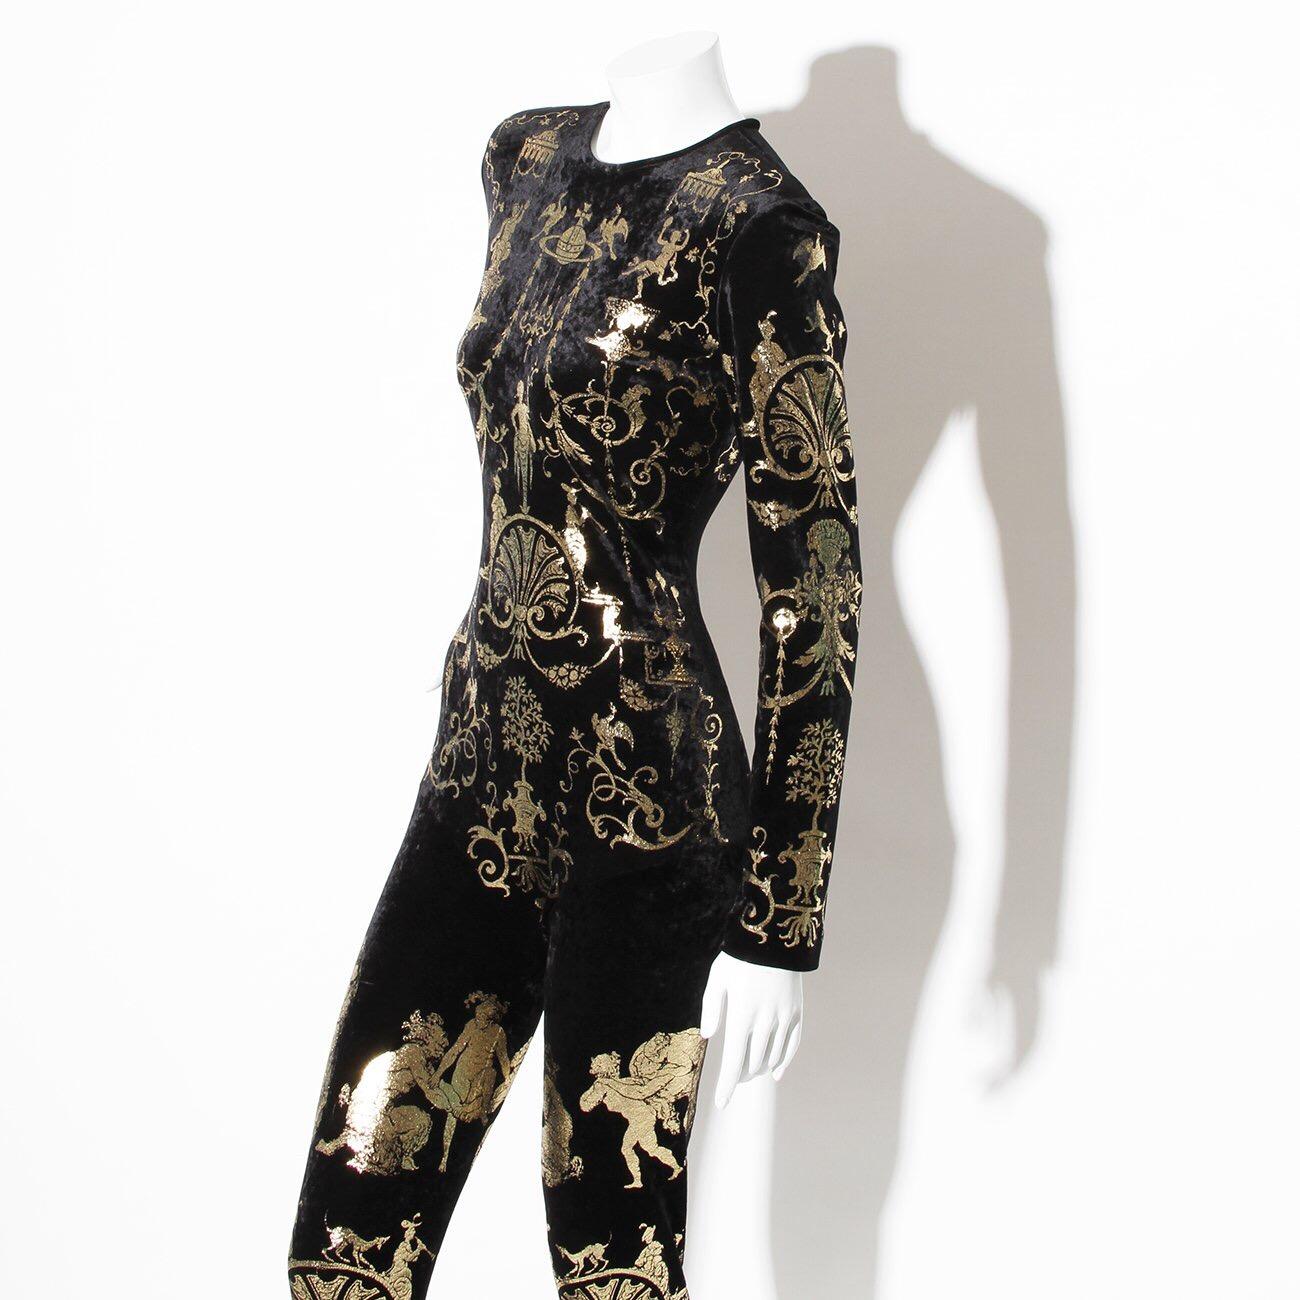 From one of the most celebrated collections of Vivienne Westwood’s earlier work, this stunning velvet jumpsuit hails from the highly coveted fall/winter 1990 portrait collection. Not only is this museum quality piece in near pristine vintage